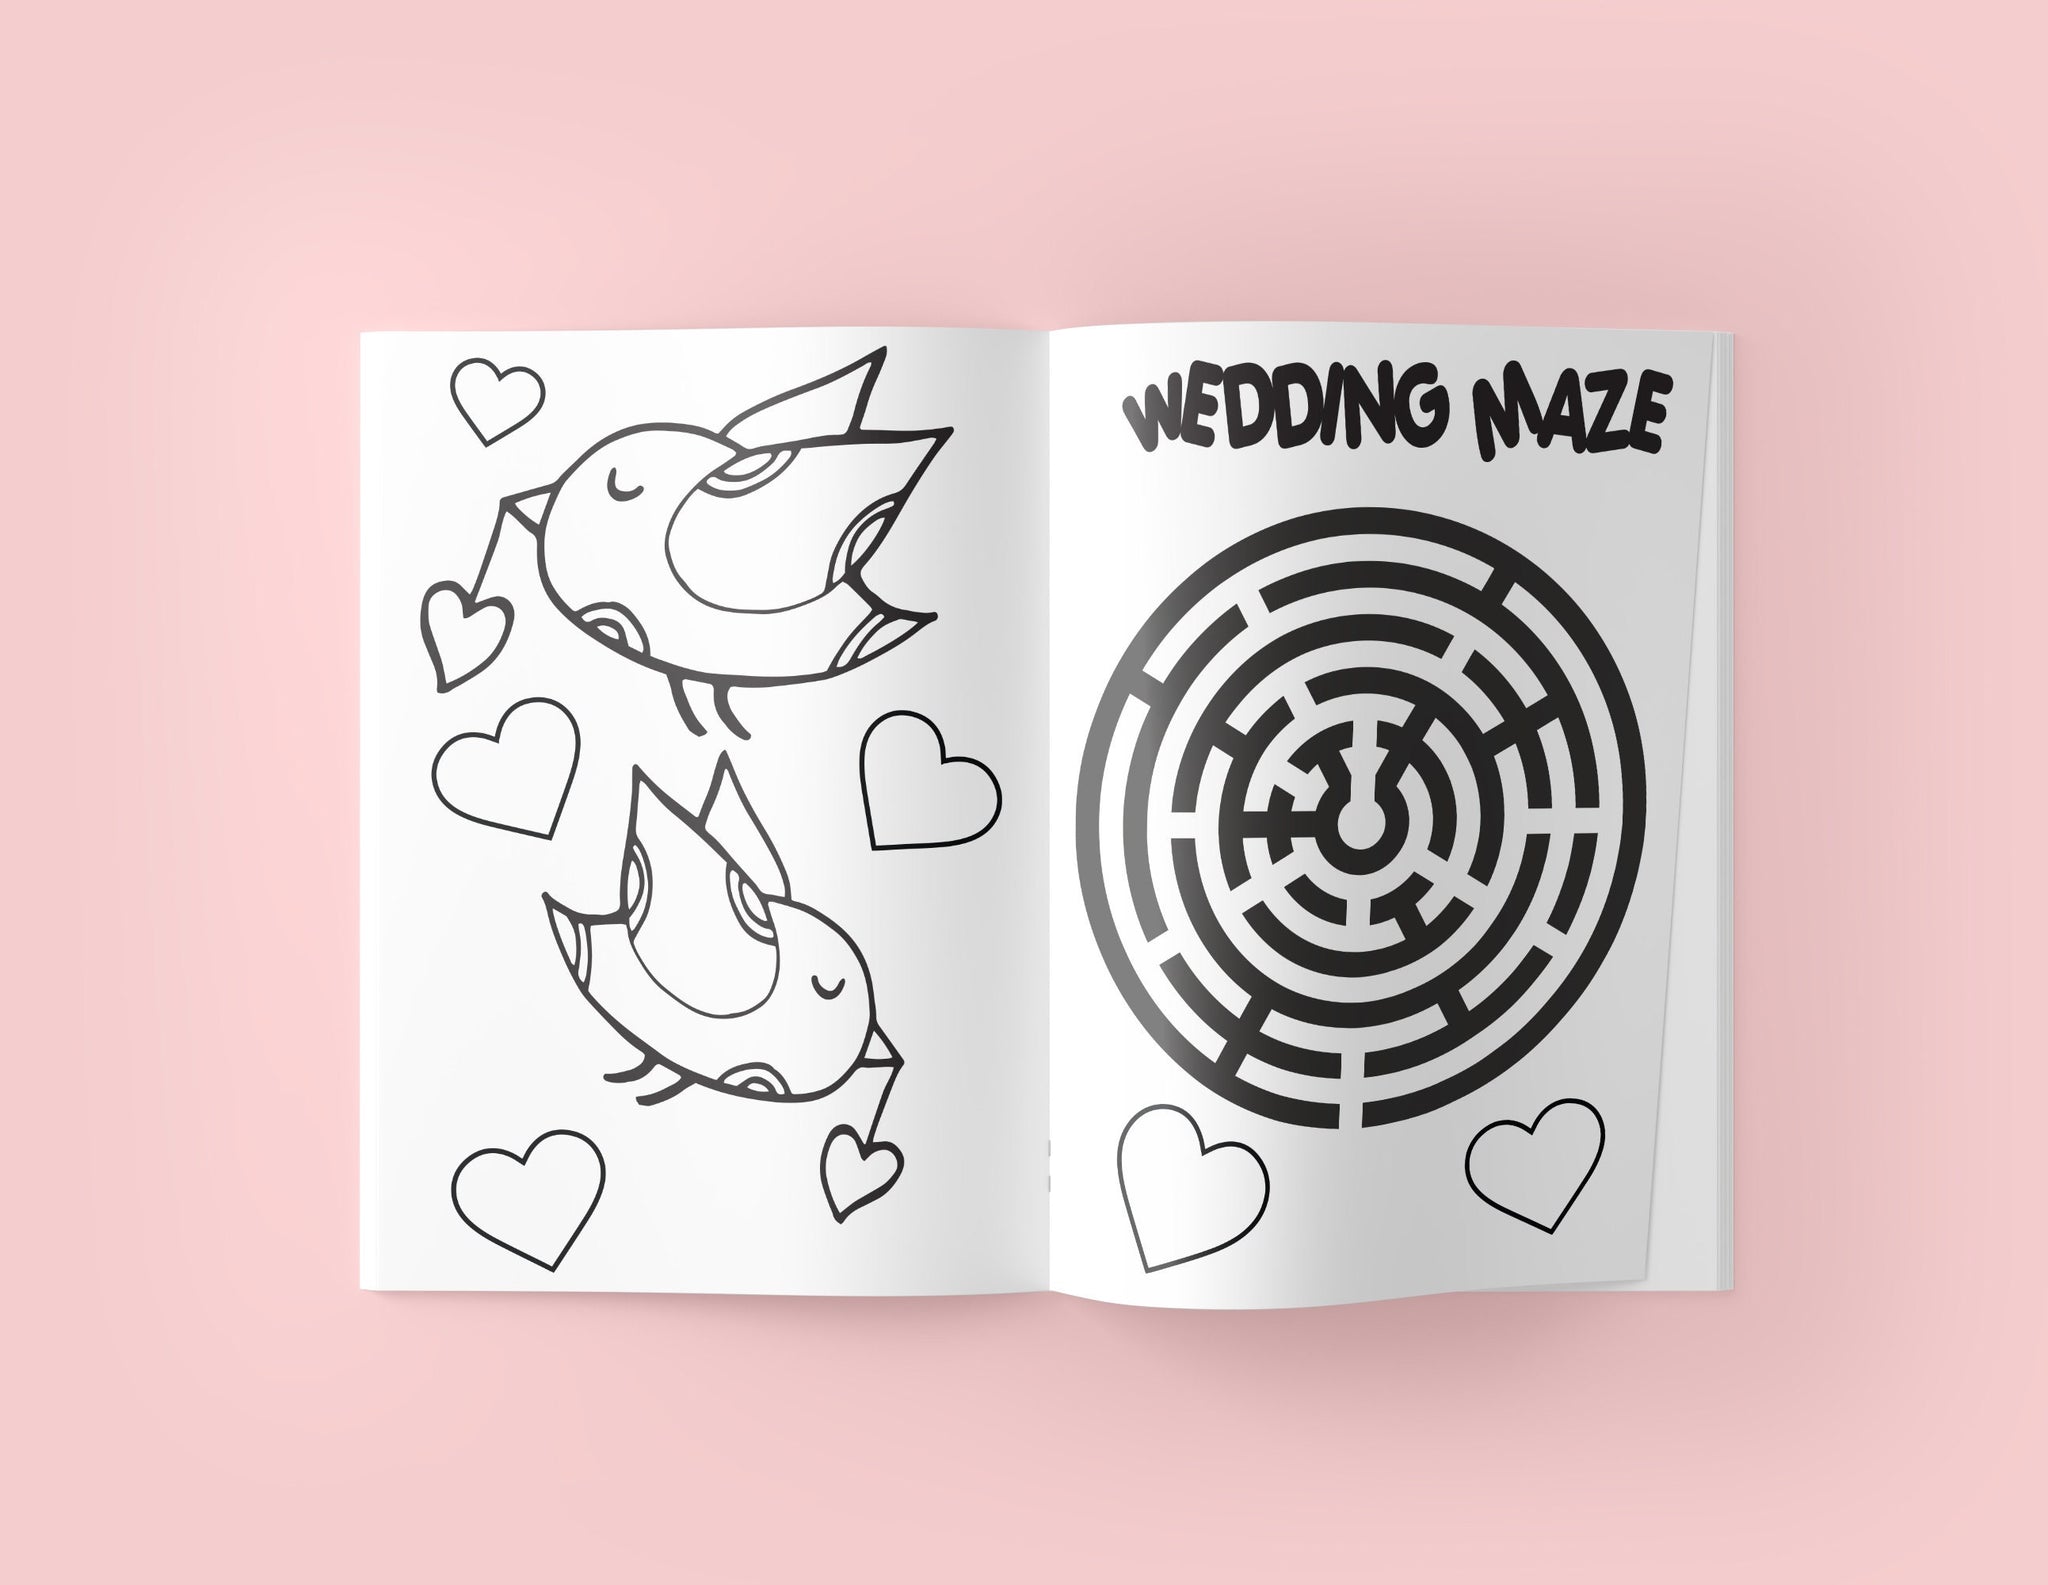 Ring Bearer Proposal Gift or Ring Security Proposal Gift Wedding Crayons, Wedding Coloring Book